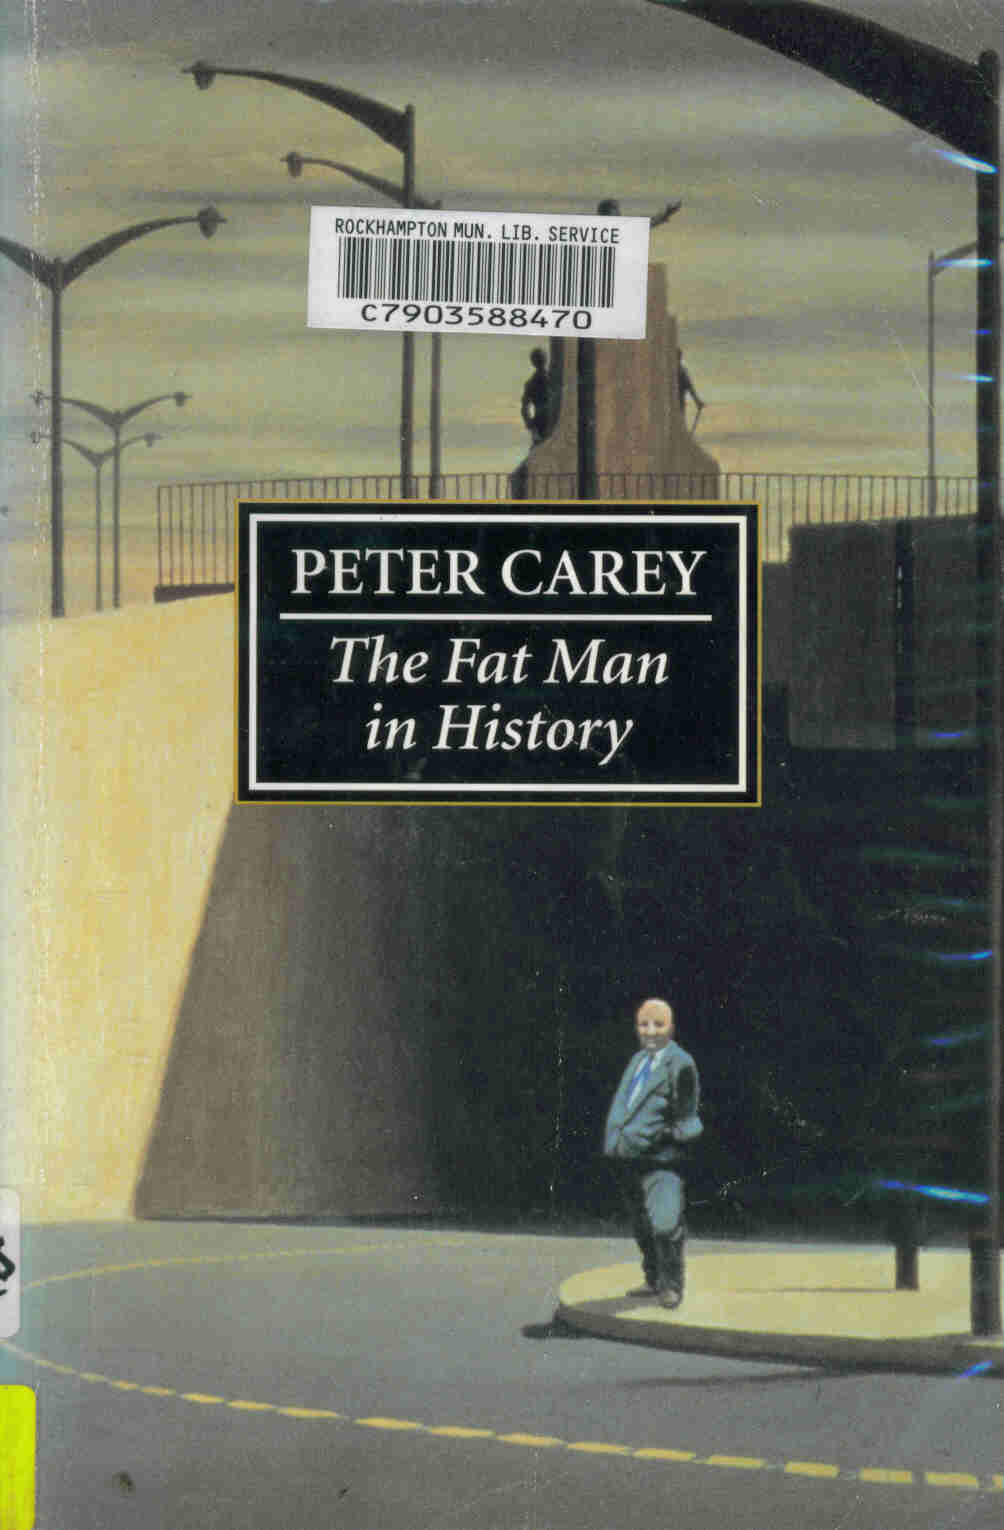 The Fat Man in History by Peter Carey